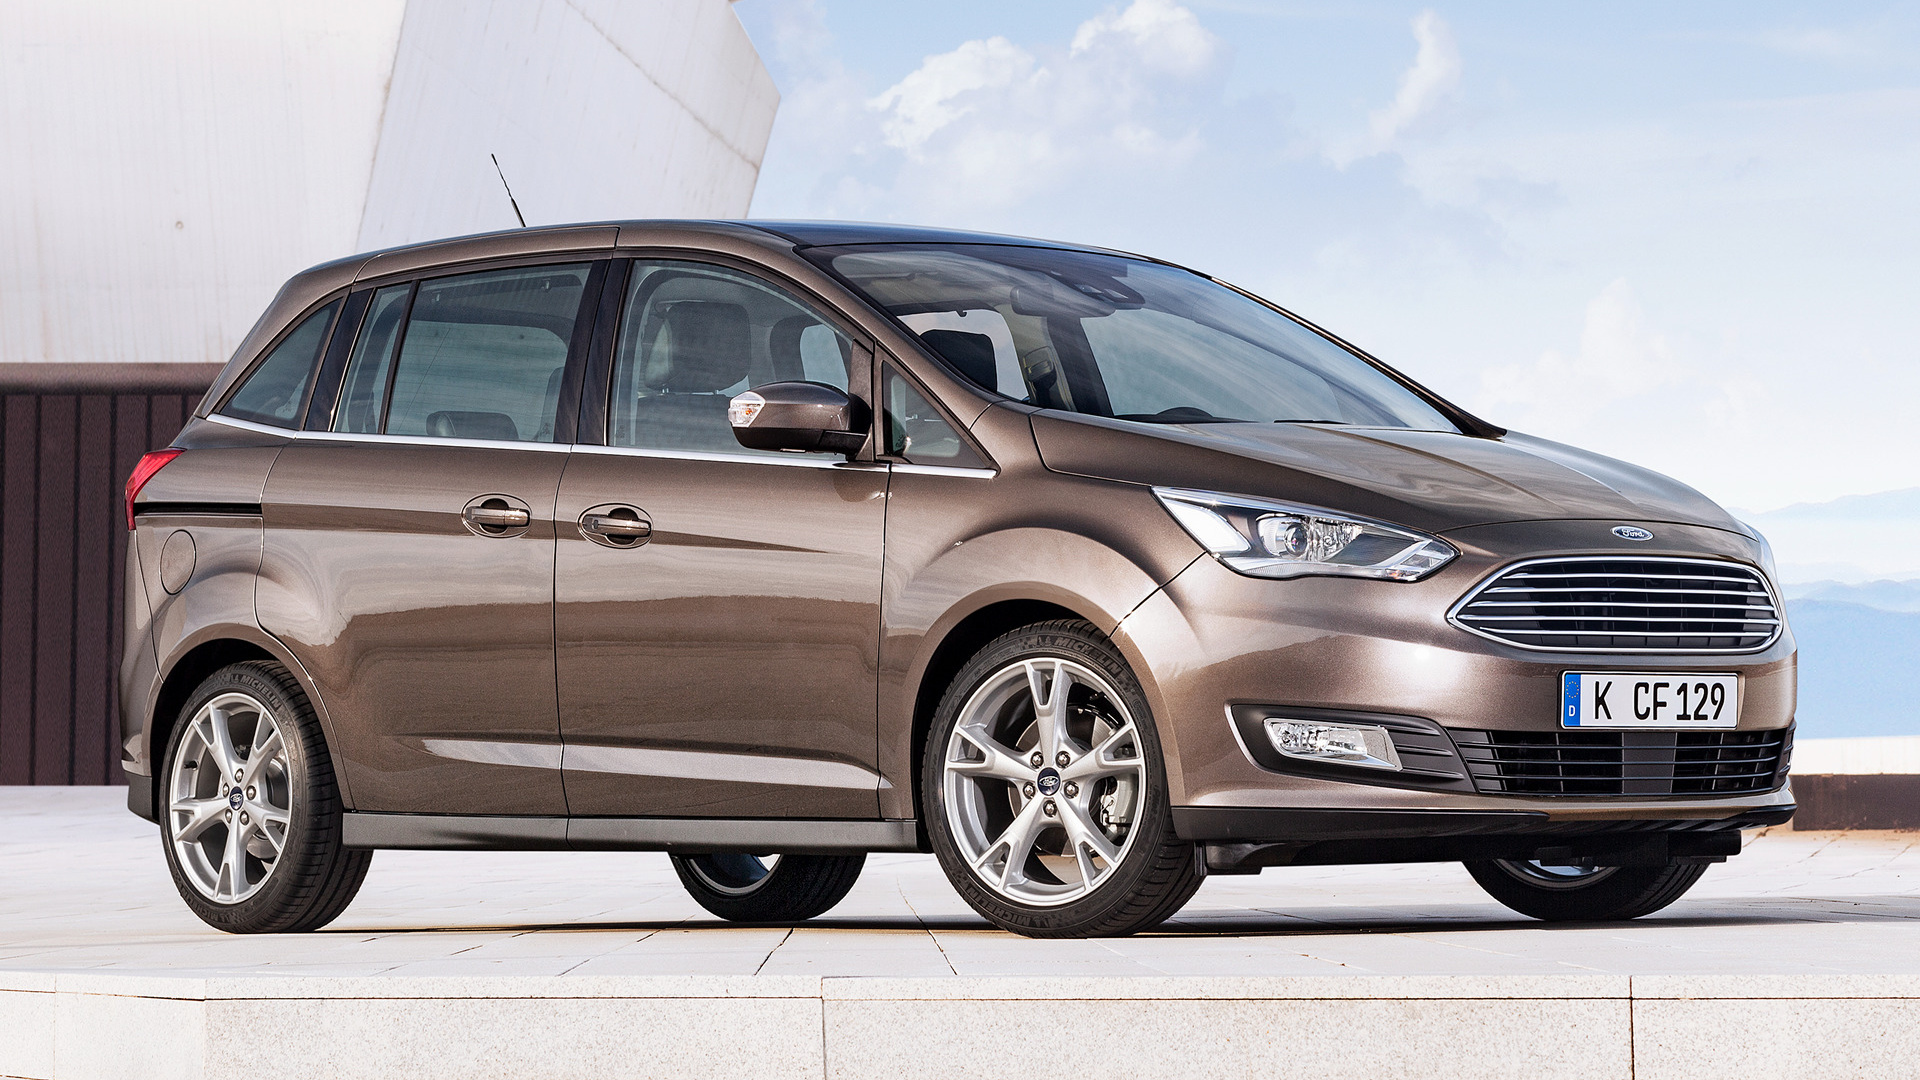 2015 Ford Grand CMAX HD Wallpaper Background Image